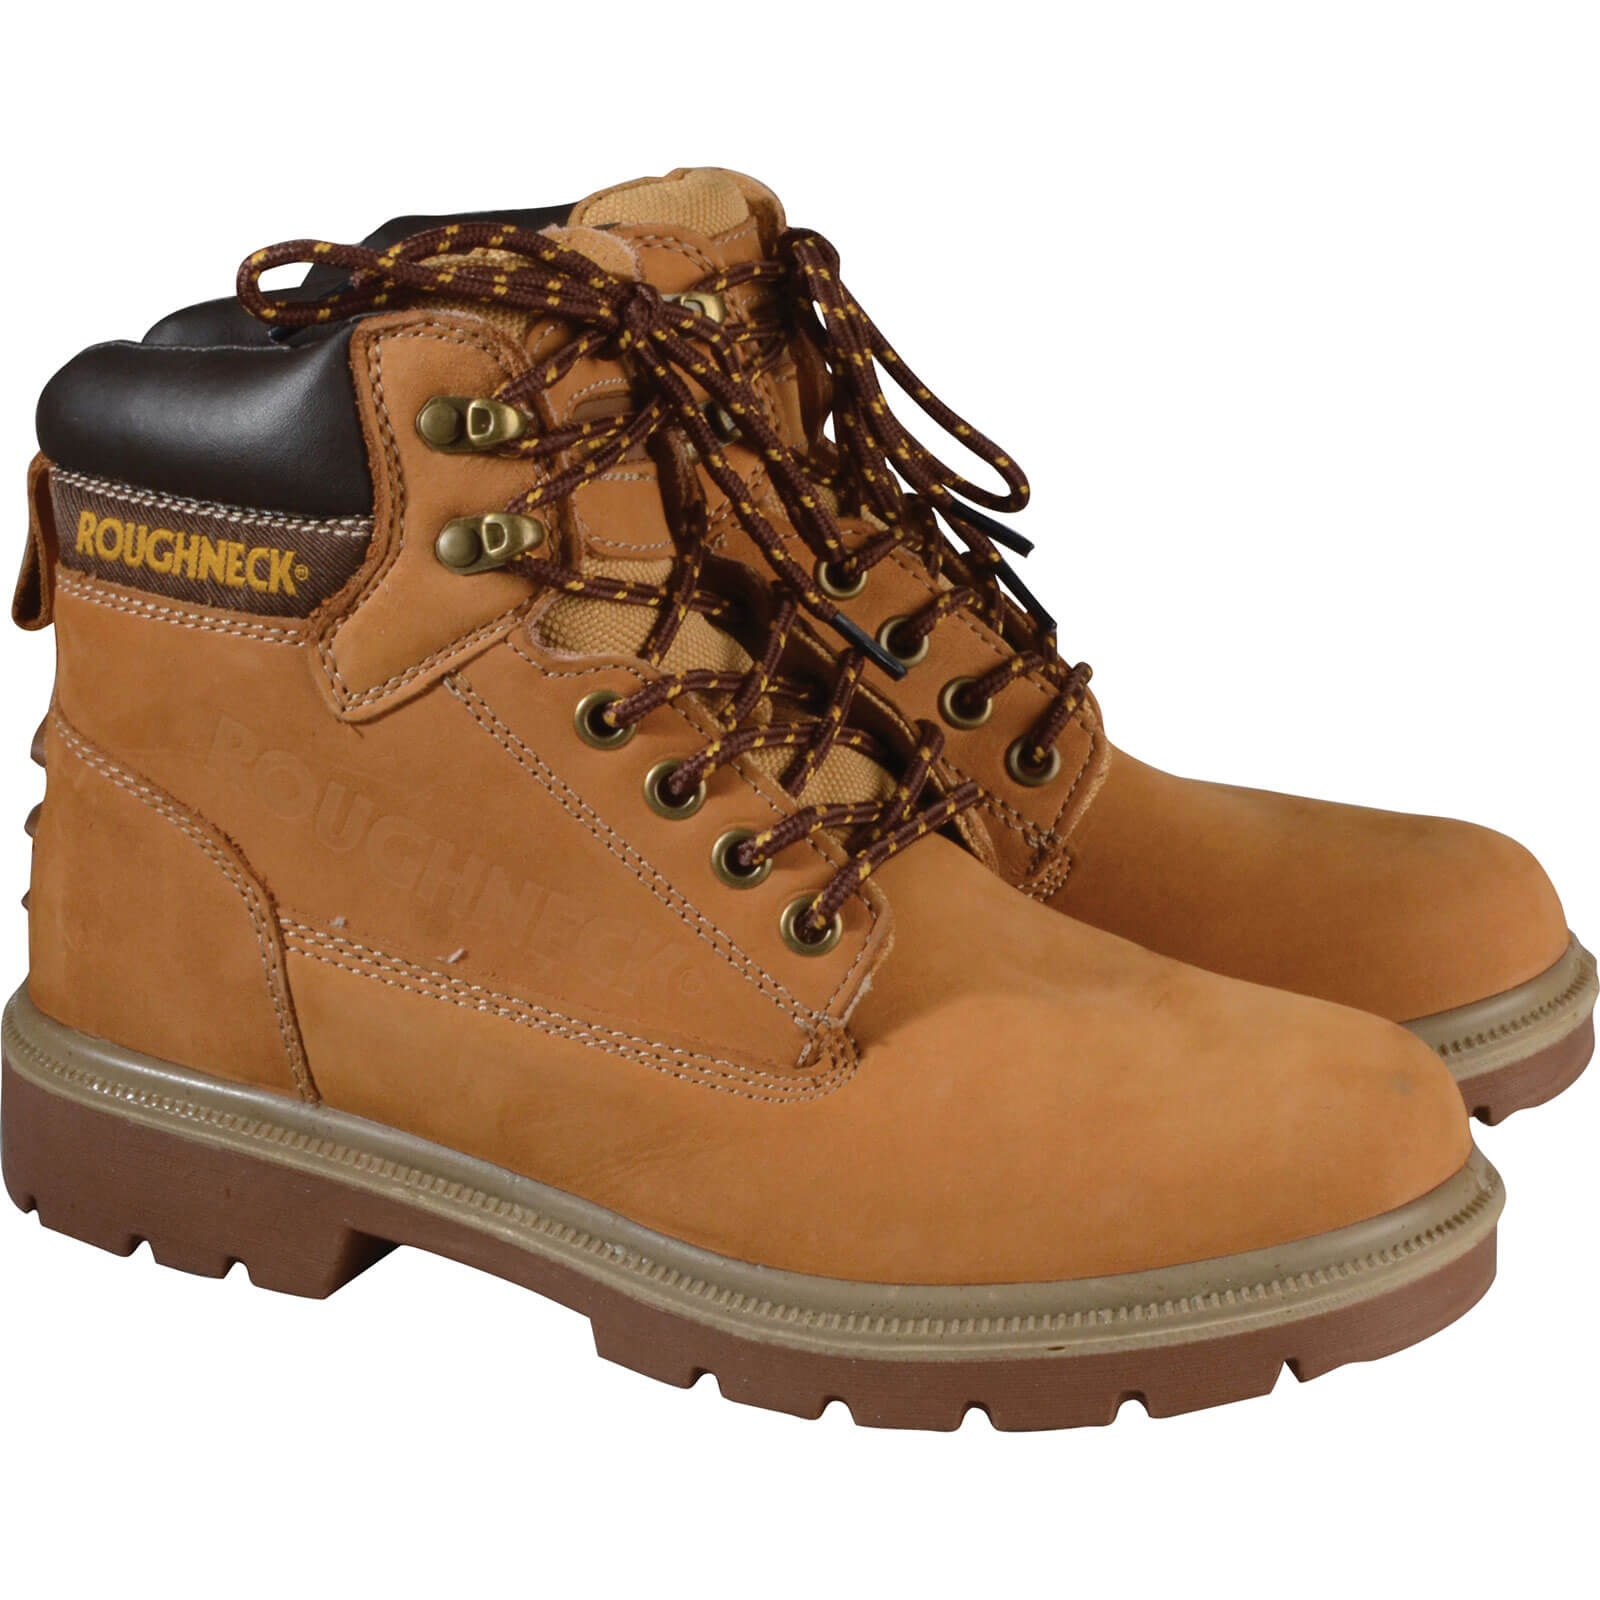 Roughneck Mens Tornado Safety Boots | Work Boots